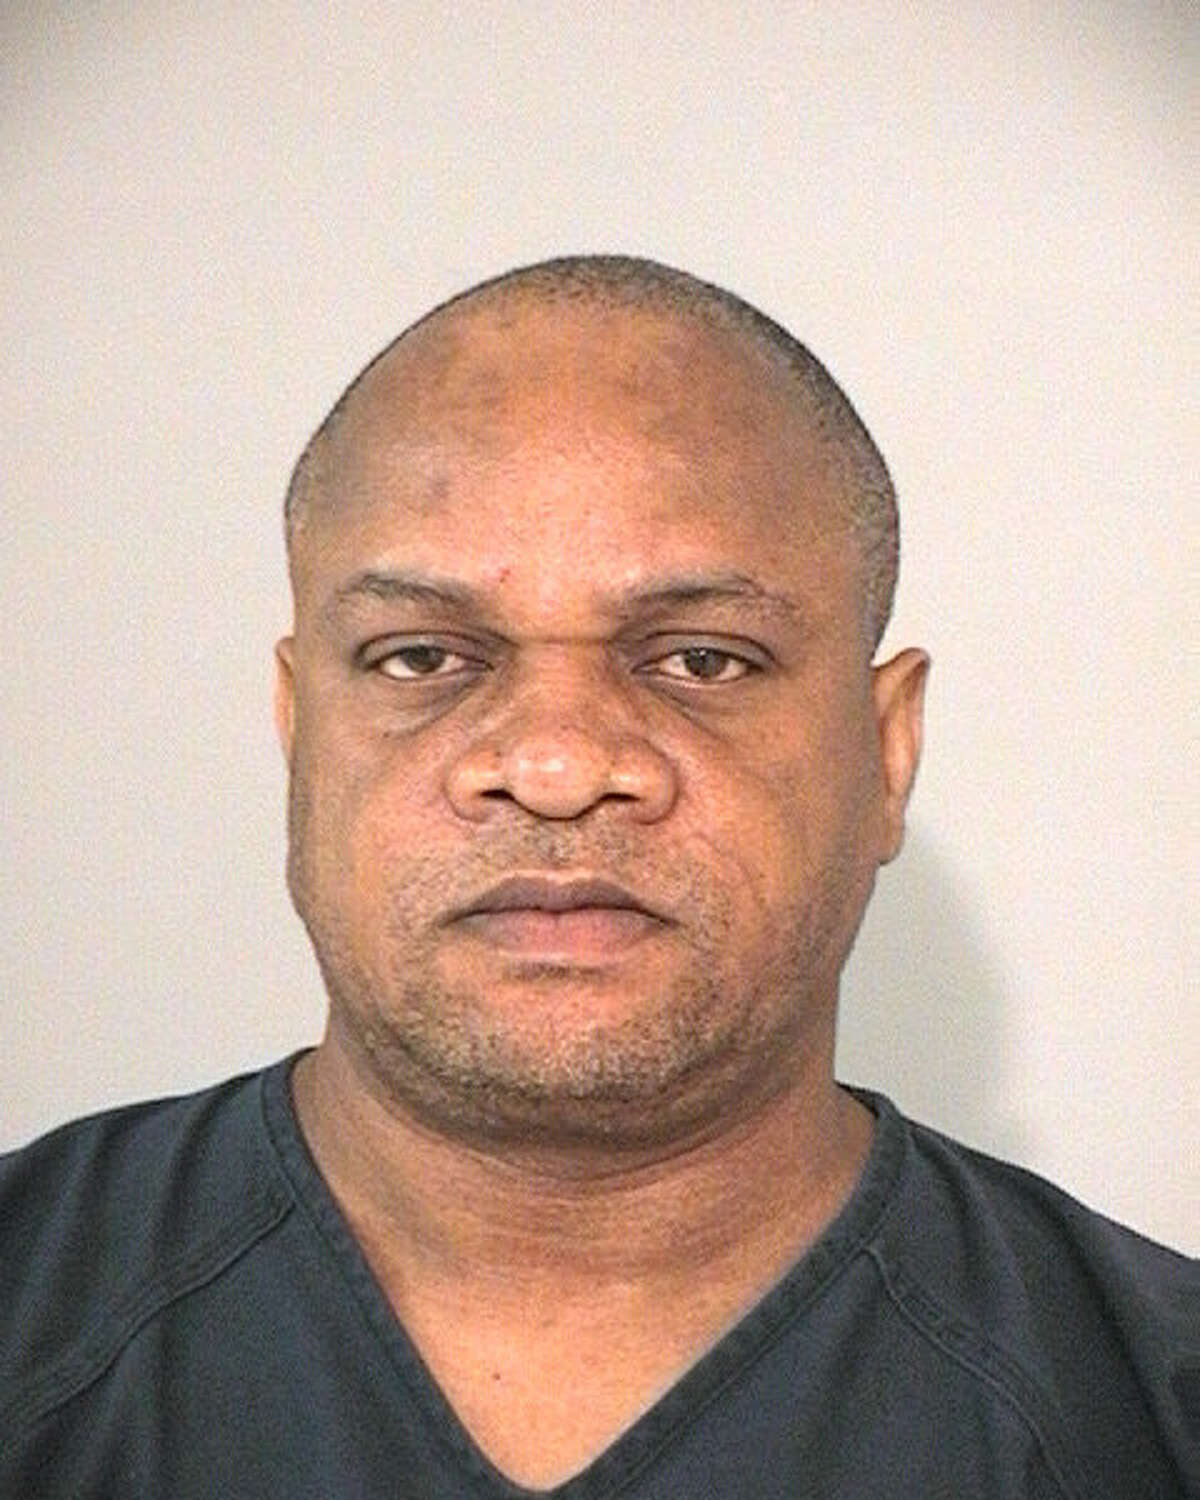 Osa Alohaneke, 56, faces a murder charge after his fiance was found dead in Fort Bend County, Wednesday, April 9, 2015.